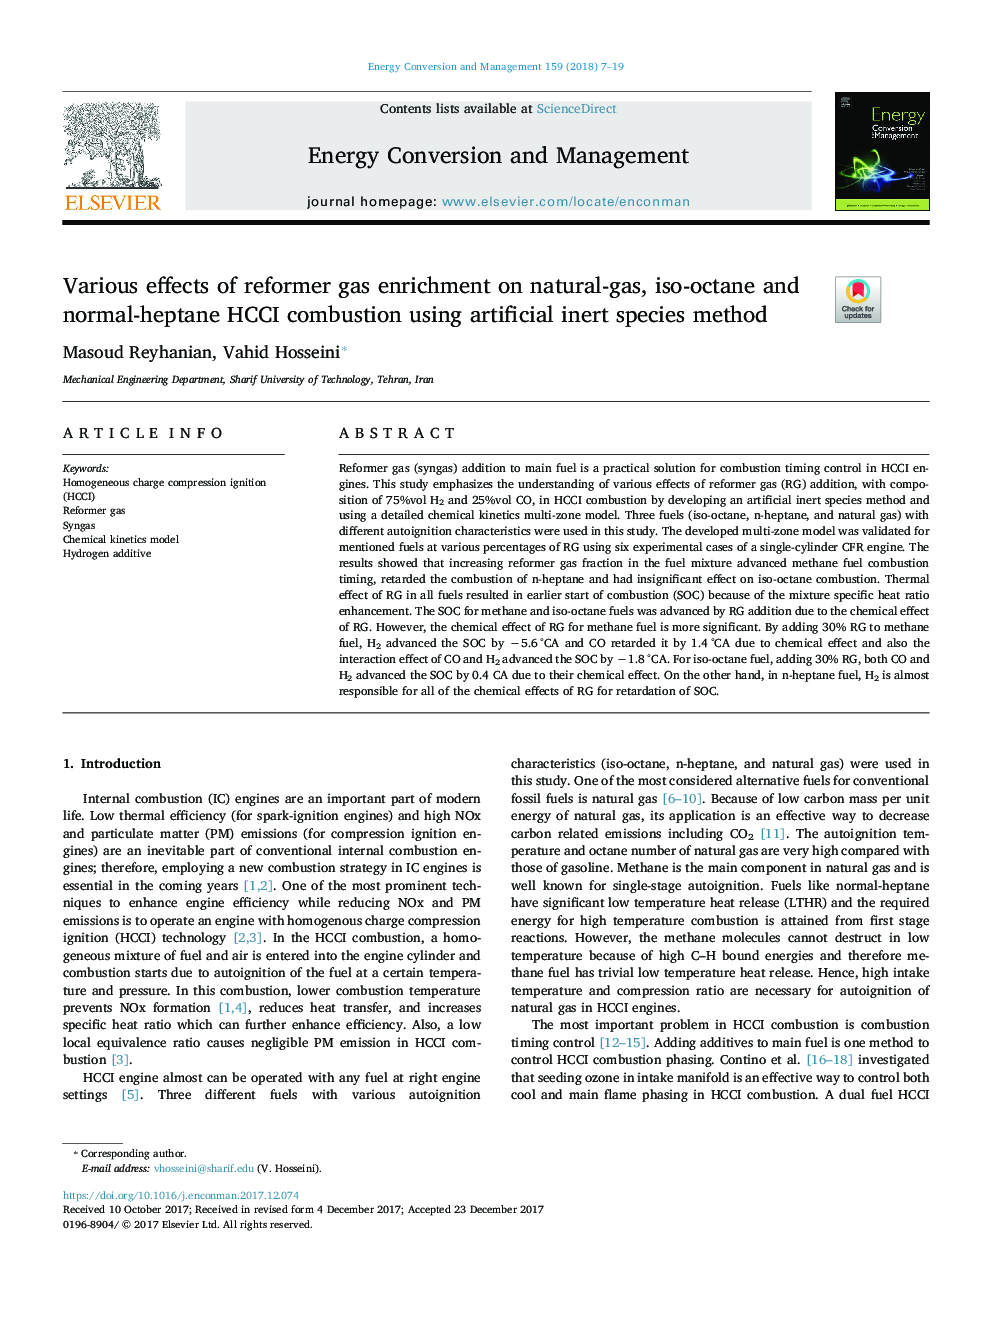 Various effects of reformer gas enrichment on natural-gas, iso-octane and normal-heptane HCCI combustion using artificial inert species method